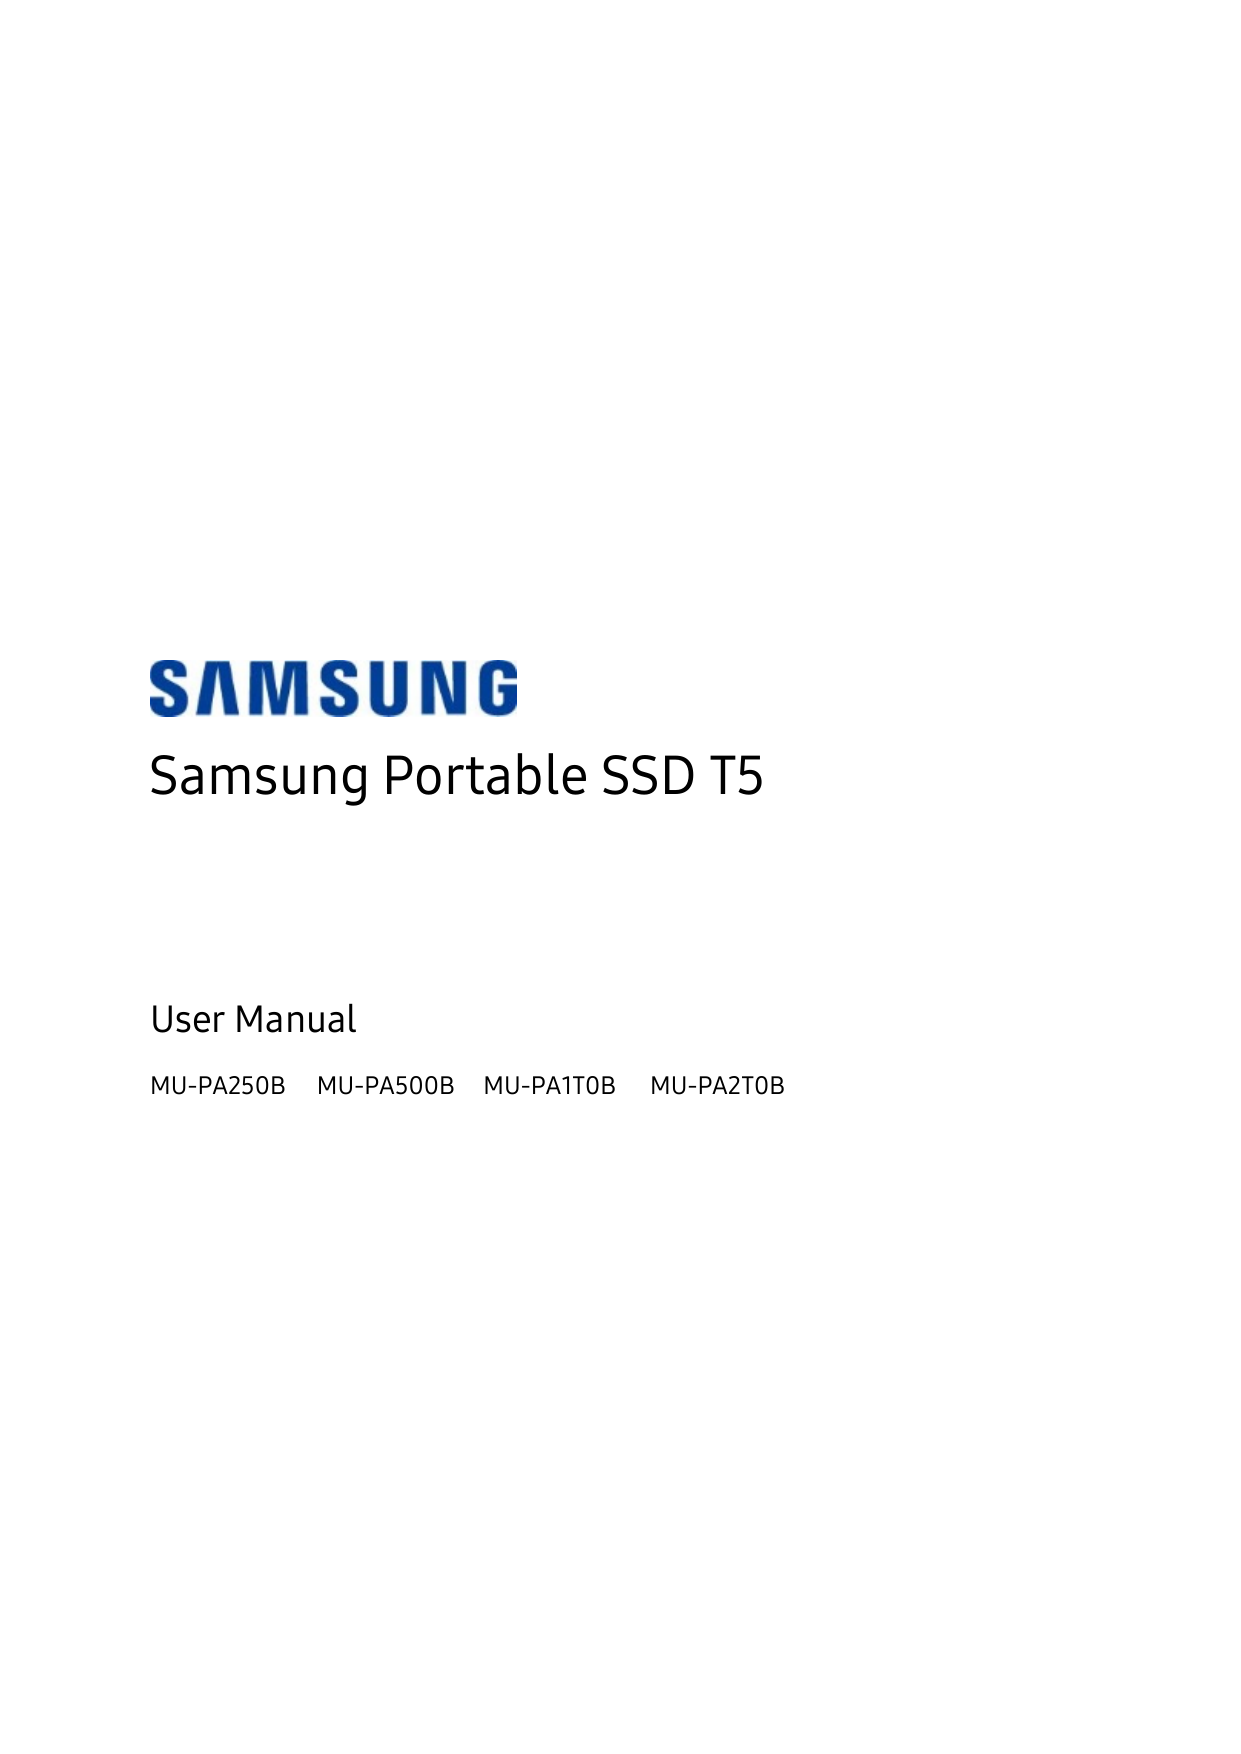 written instructions for reformatting samsung t5 ssd for mac